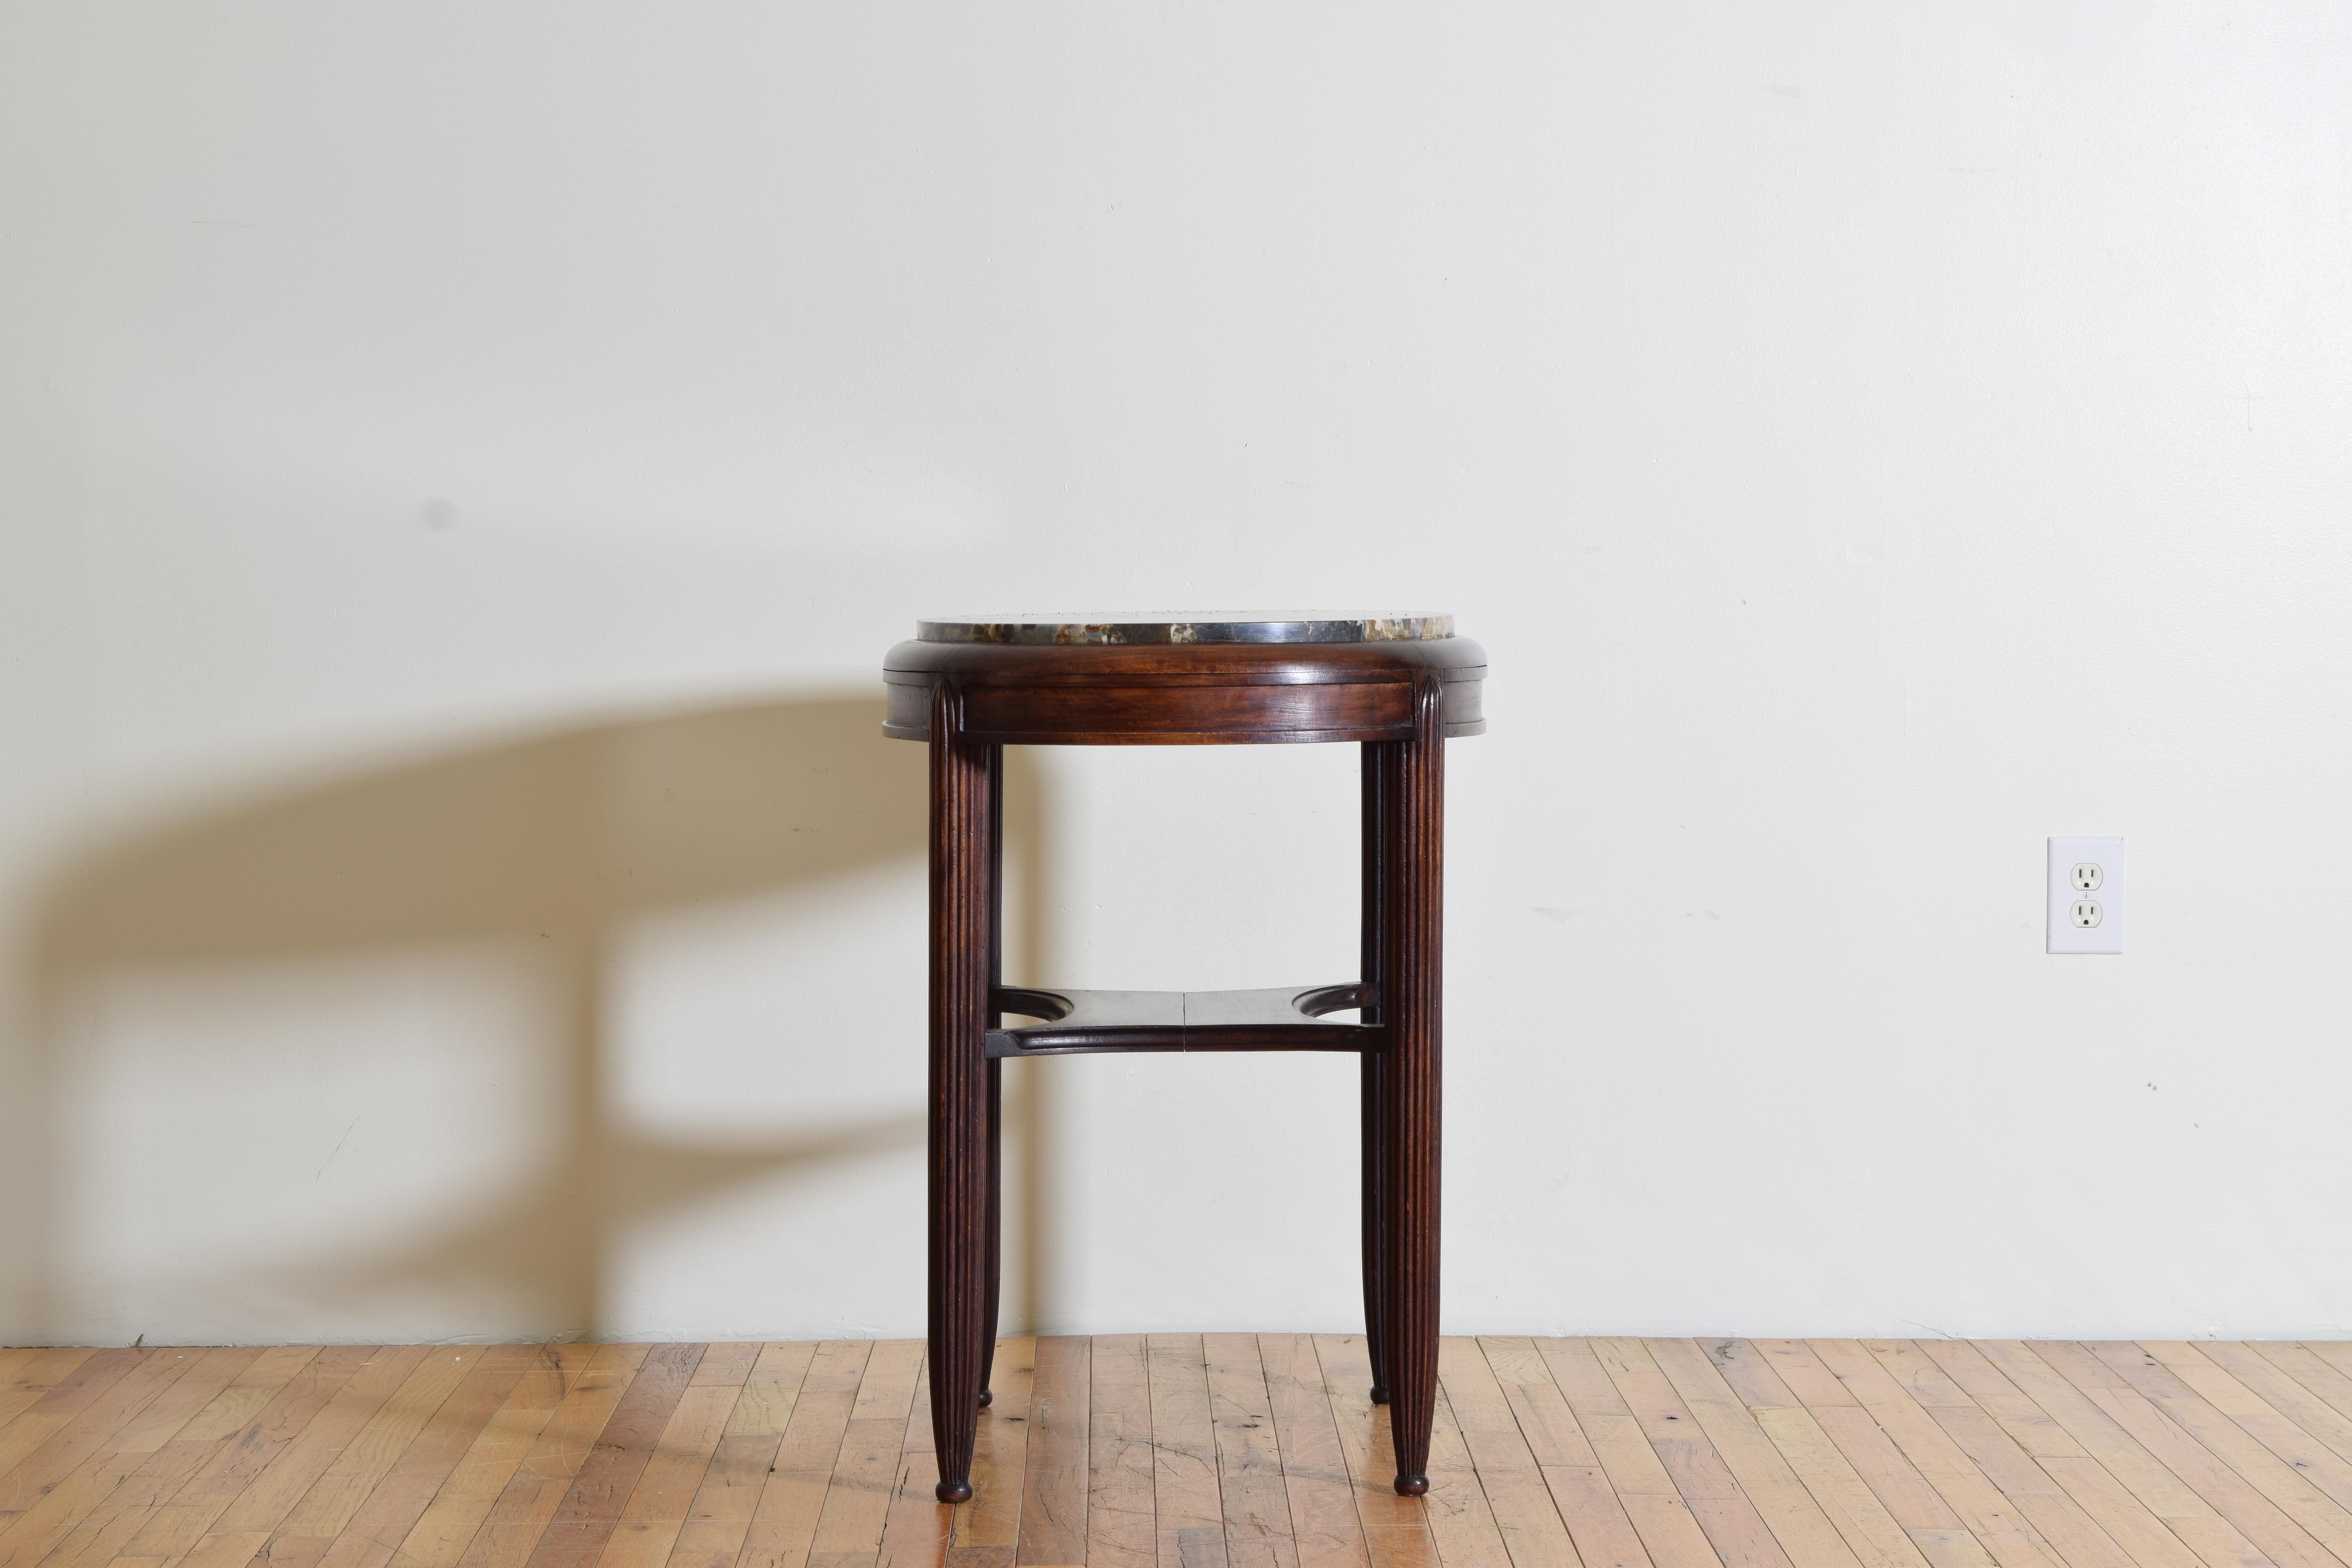 20th Century French Art Deco Period Mahogany and Marble-Top Table, circa 1920-1930 For Sale